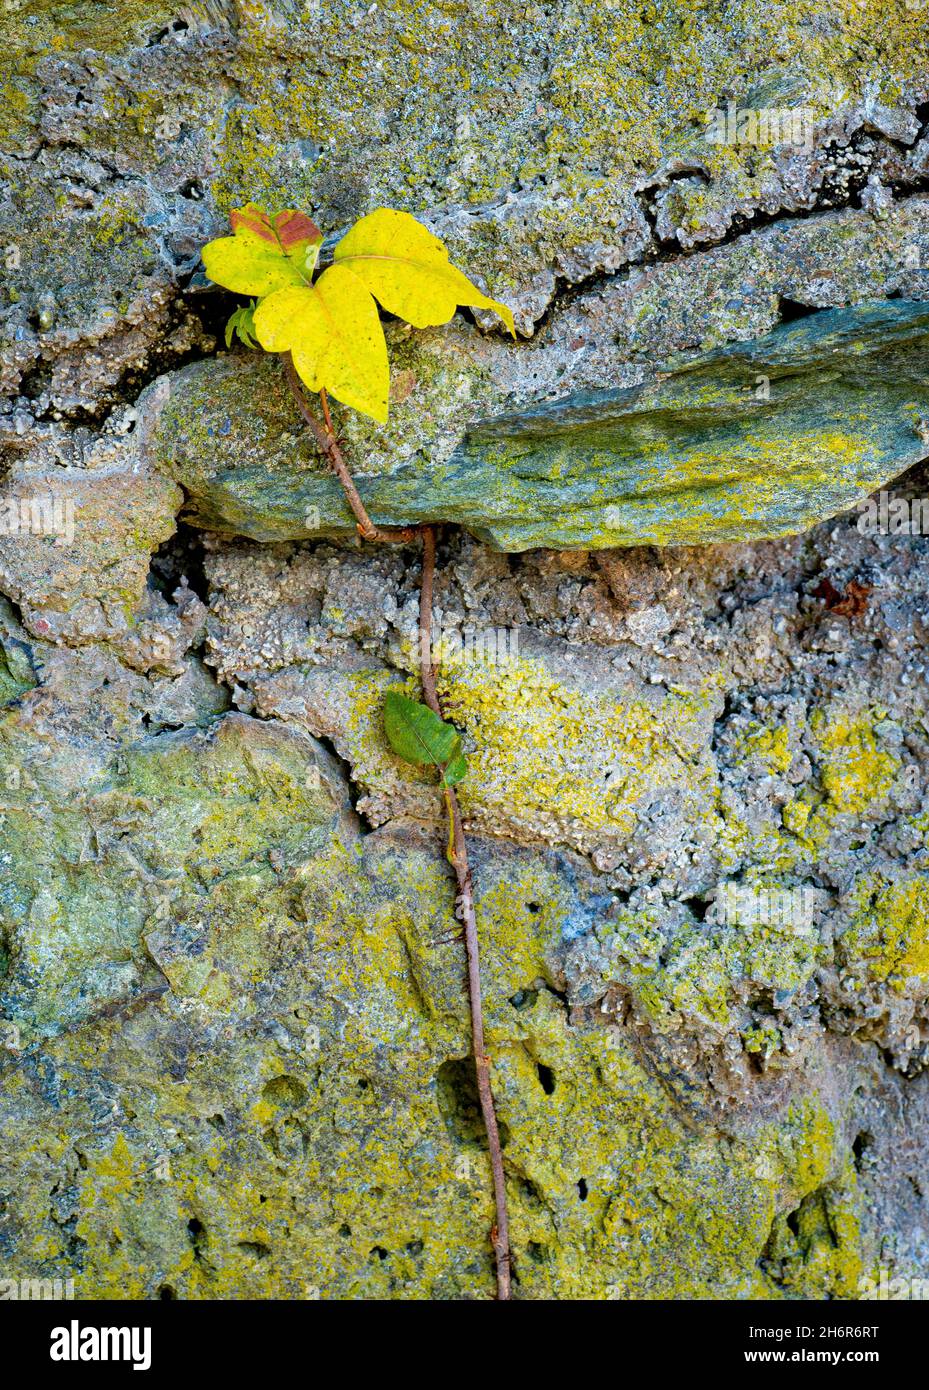 Vine of poison ivy (Toxicodendron radicans) climbing an old stone wall in autumn in central Virginia. Yellow color on wall is lichen. Stock Photo